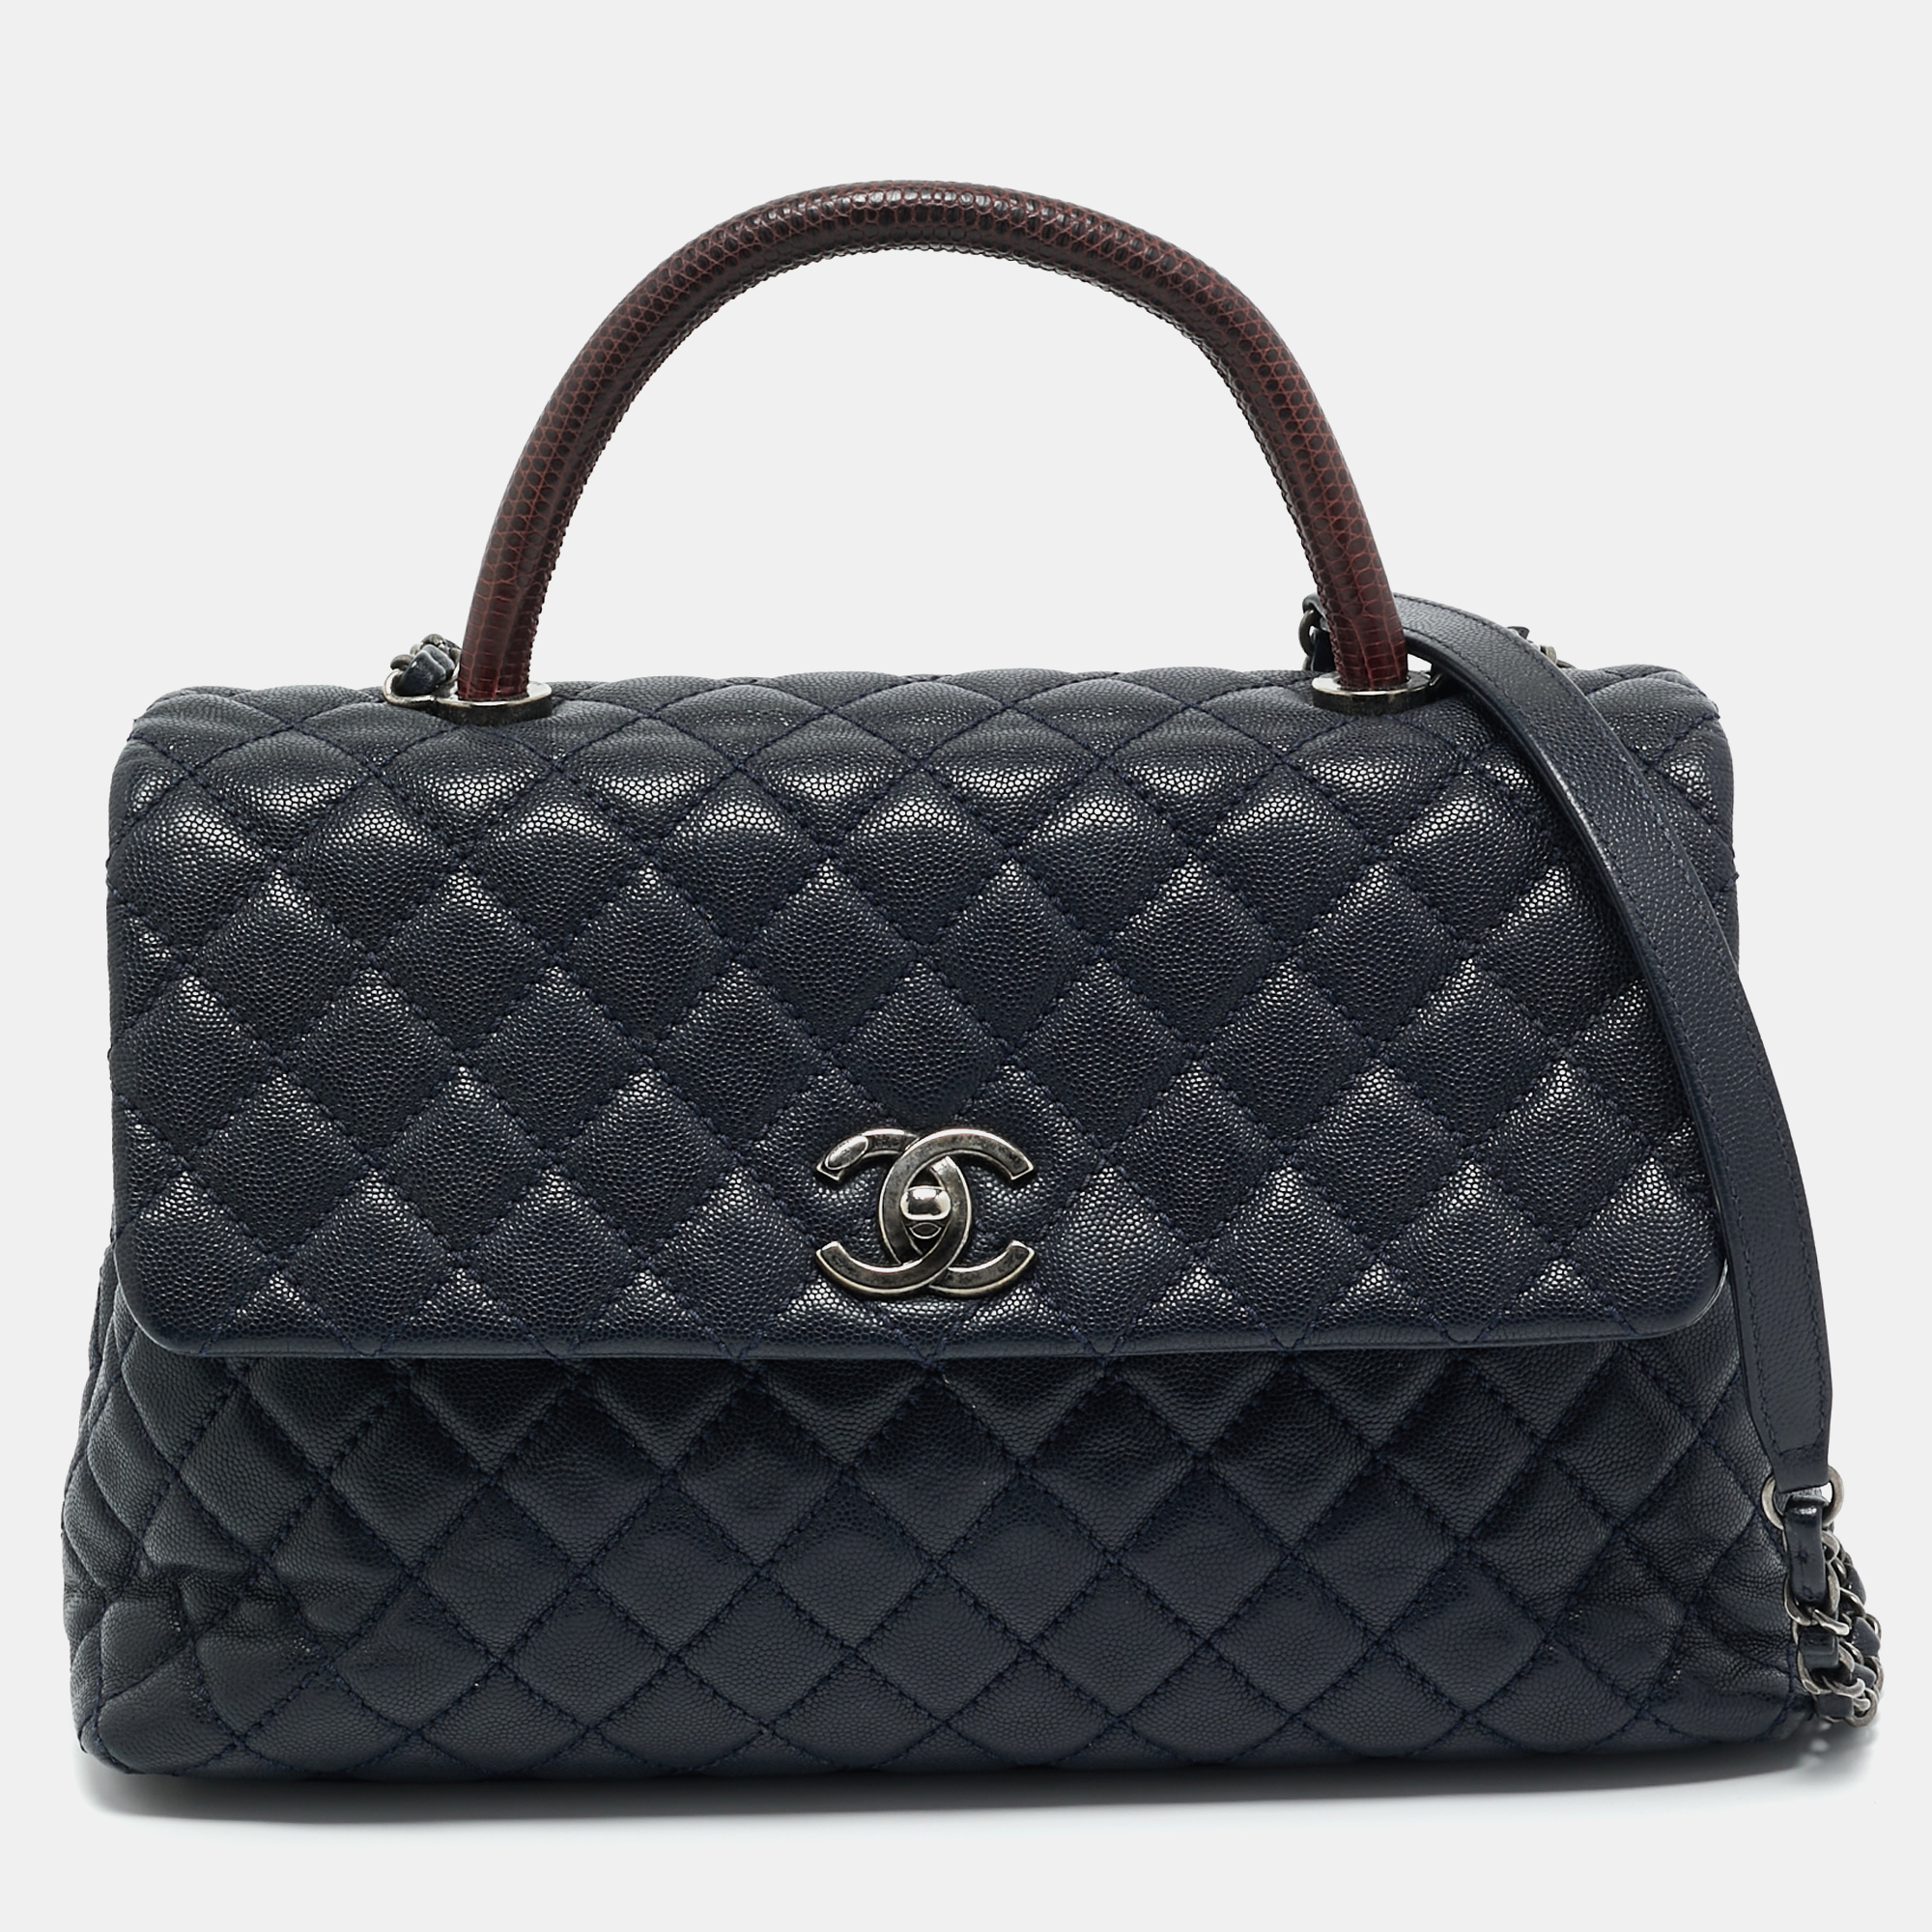 Chanel dark blue/burgundy quilted caviar leather and lizard large coco top handle bag